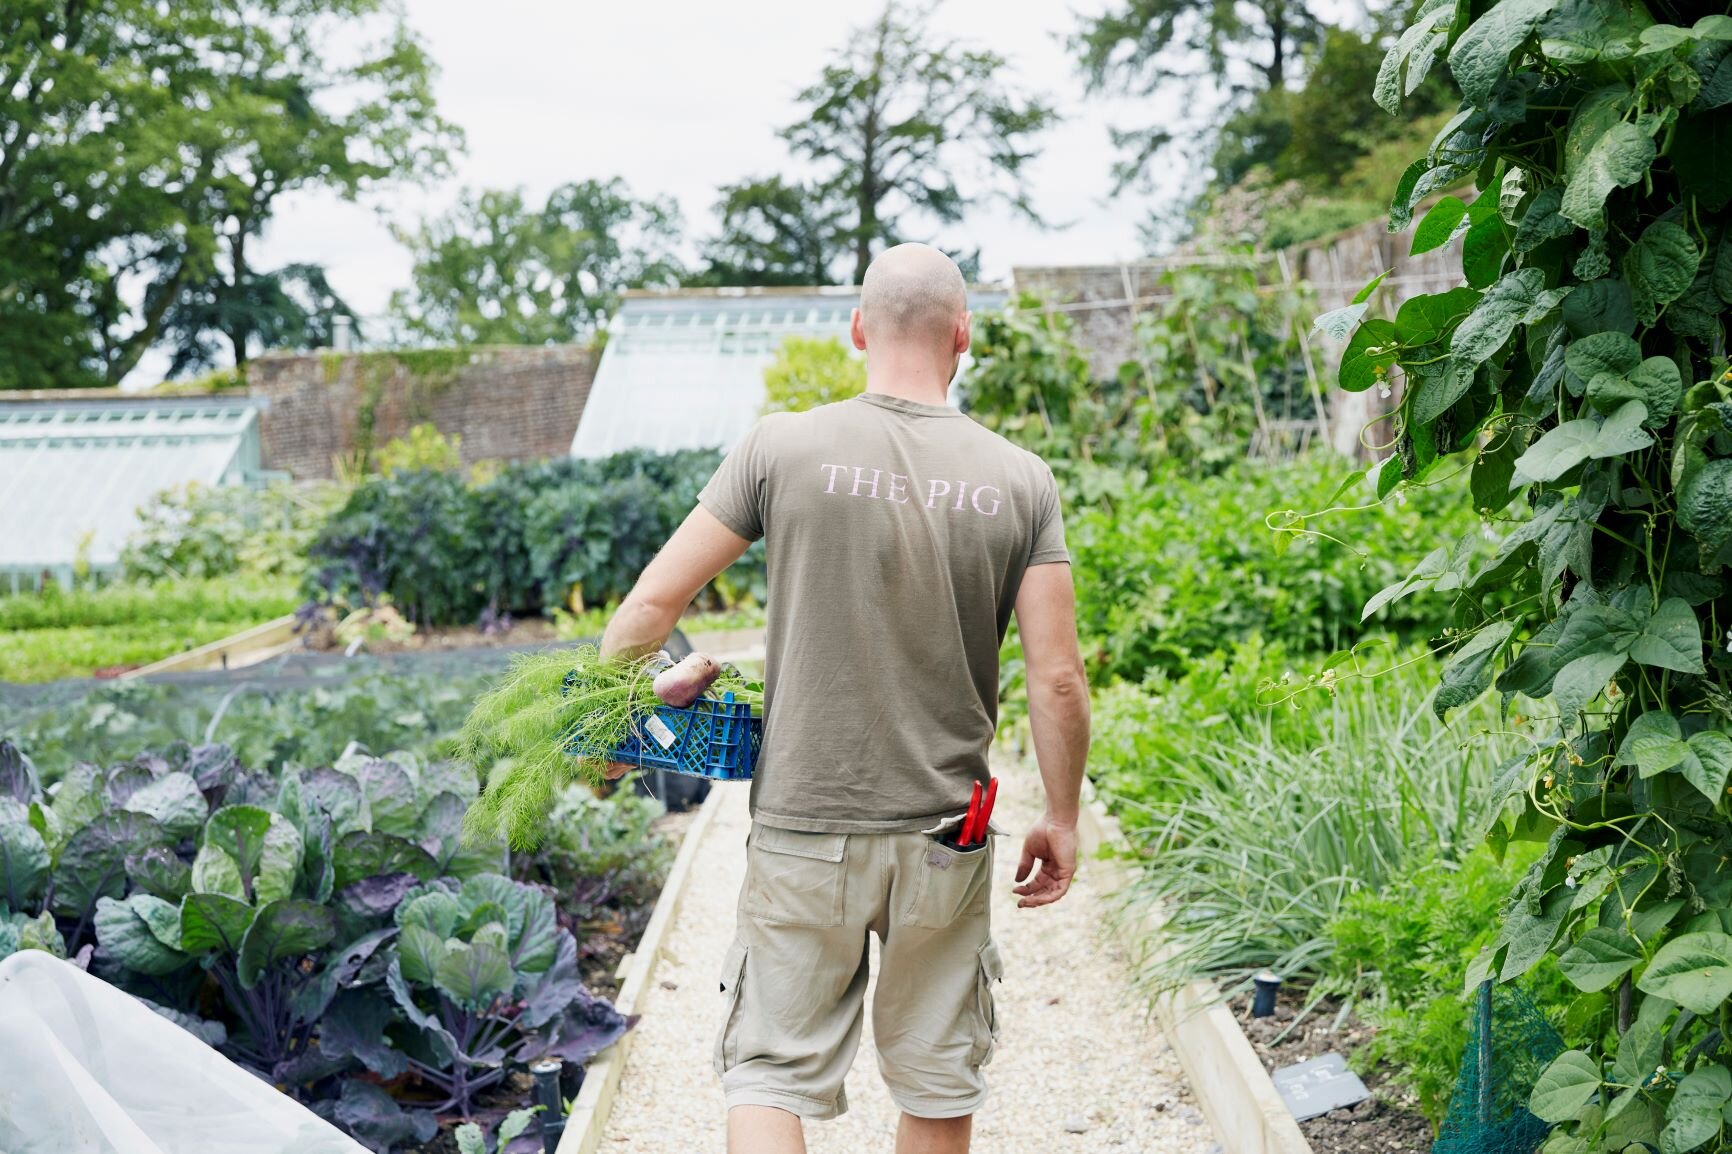 THE PIG-at Combe - Kitchen Garden Tours &amp; Lunch